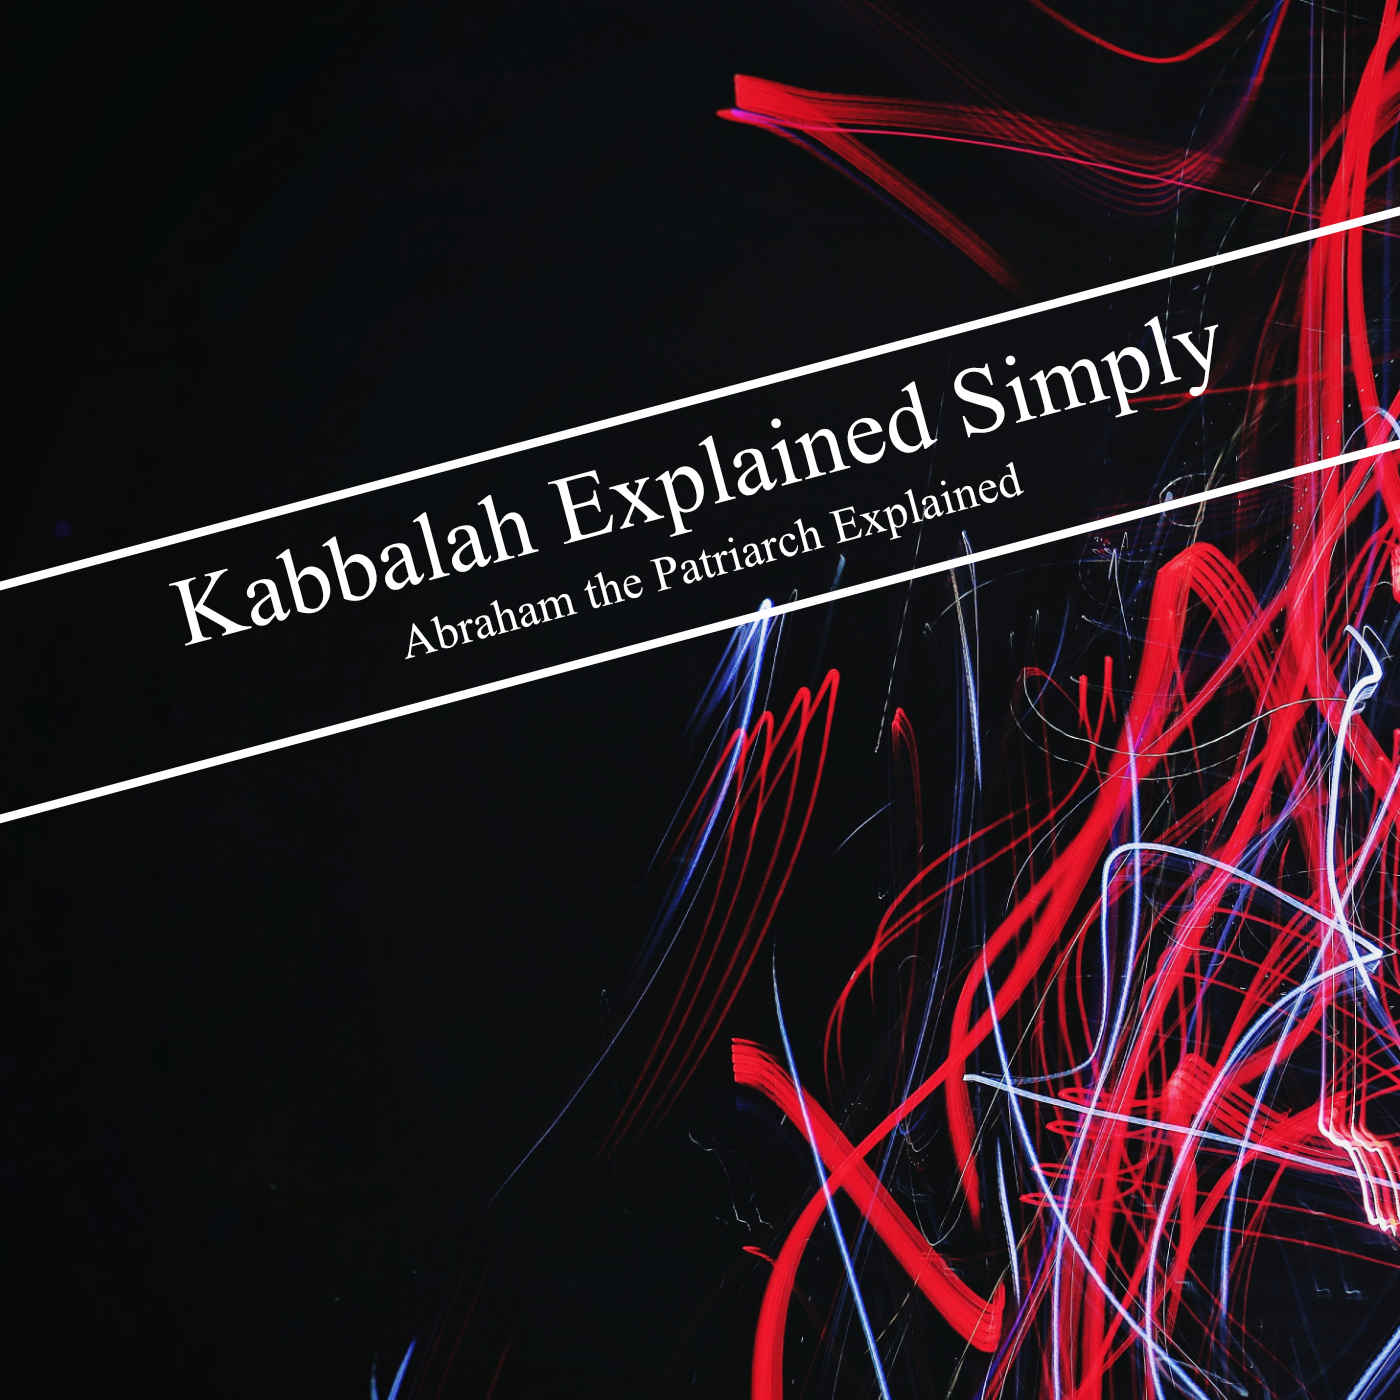 Kabbalah Explained Simply - Abraham the Patriarch Explained